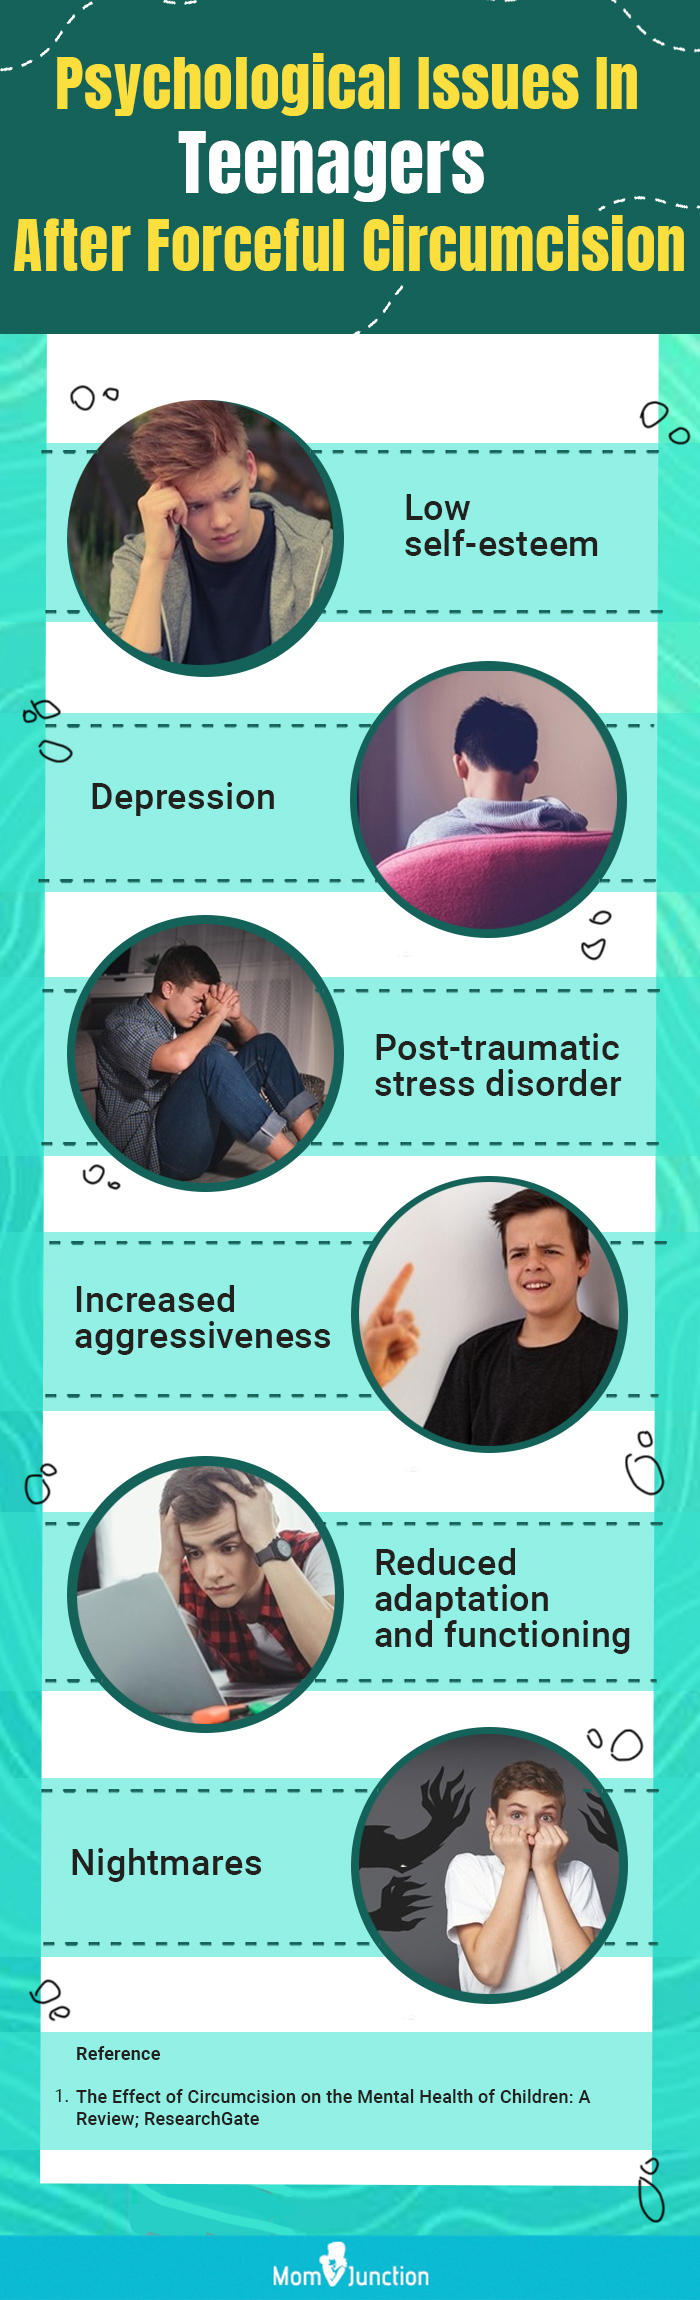 effects of forceful circumcision in teens [infographic]